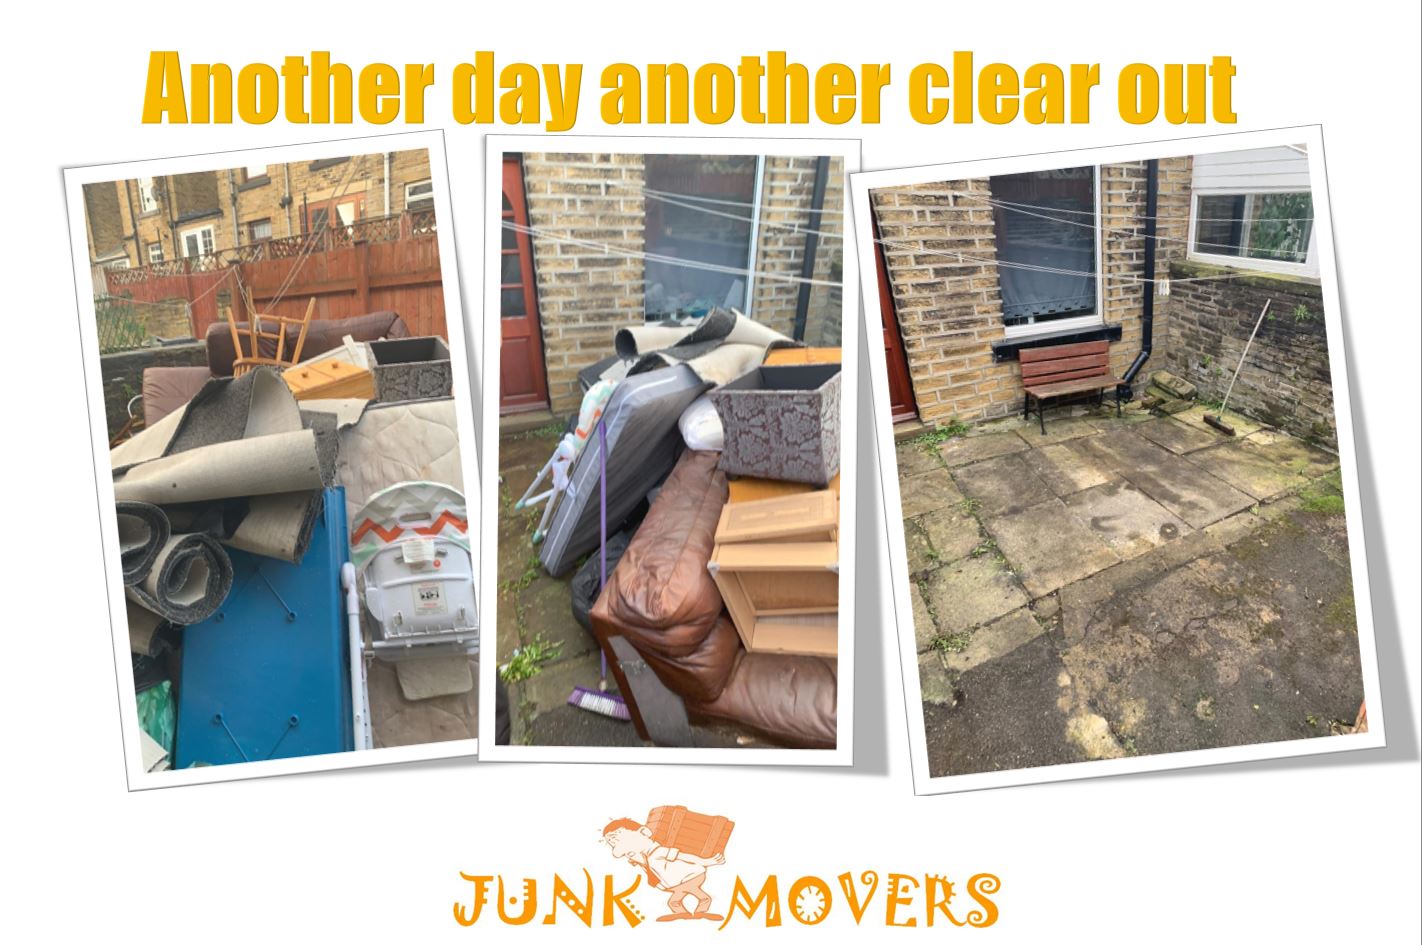 Junk Collections Mirfield, Junk Movers West Yorkshire Ltd